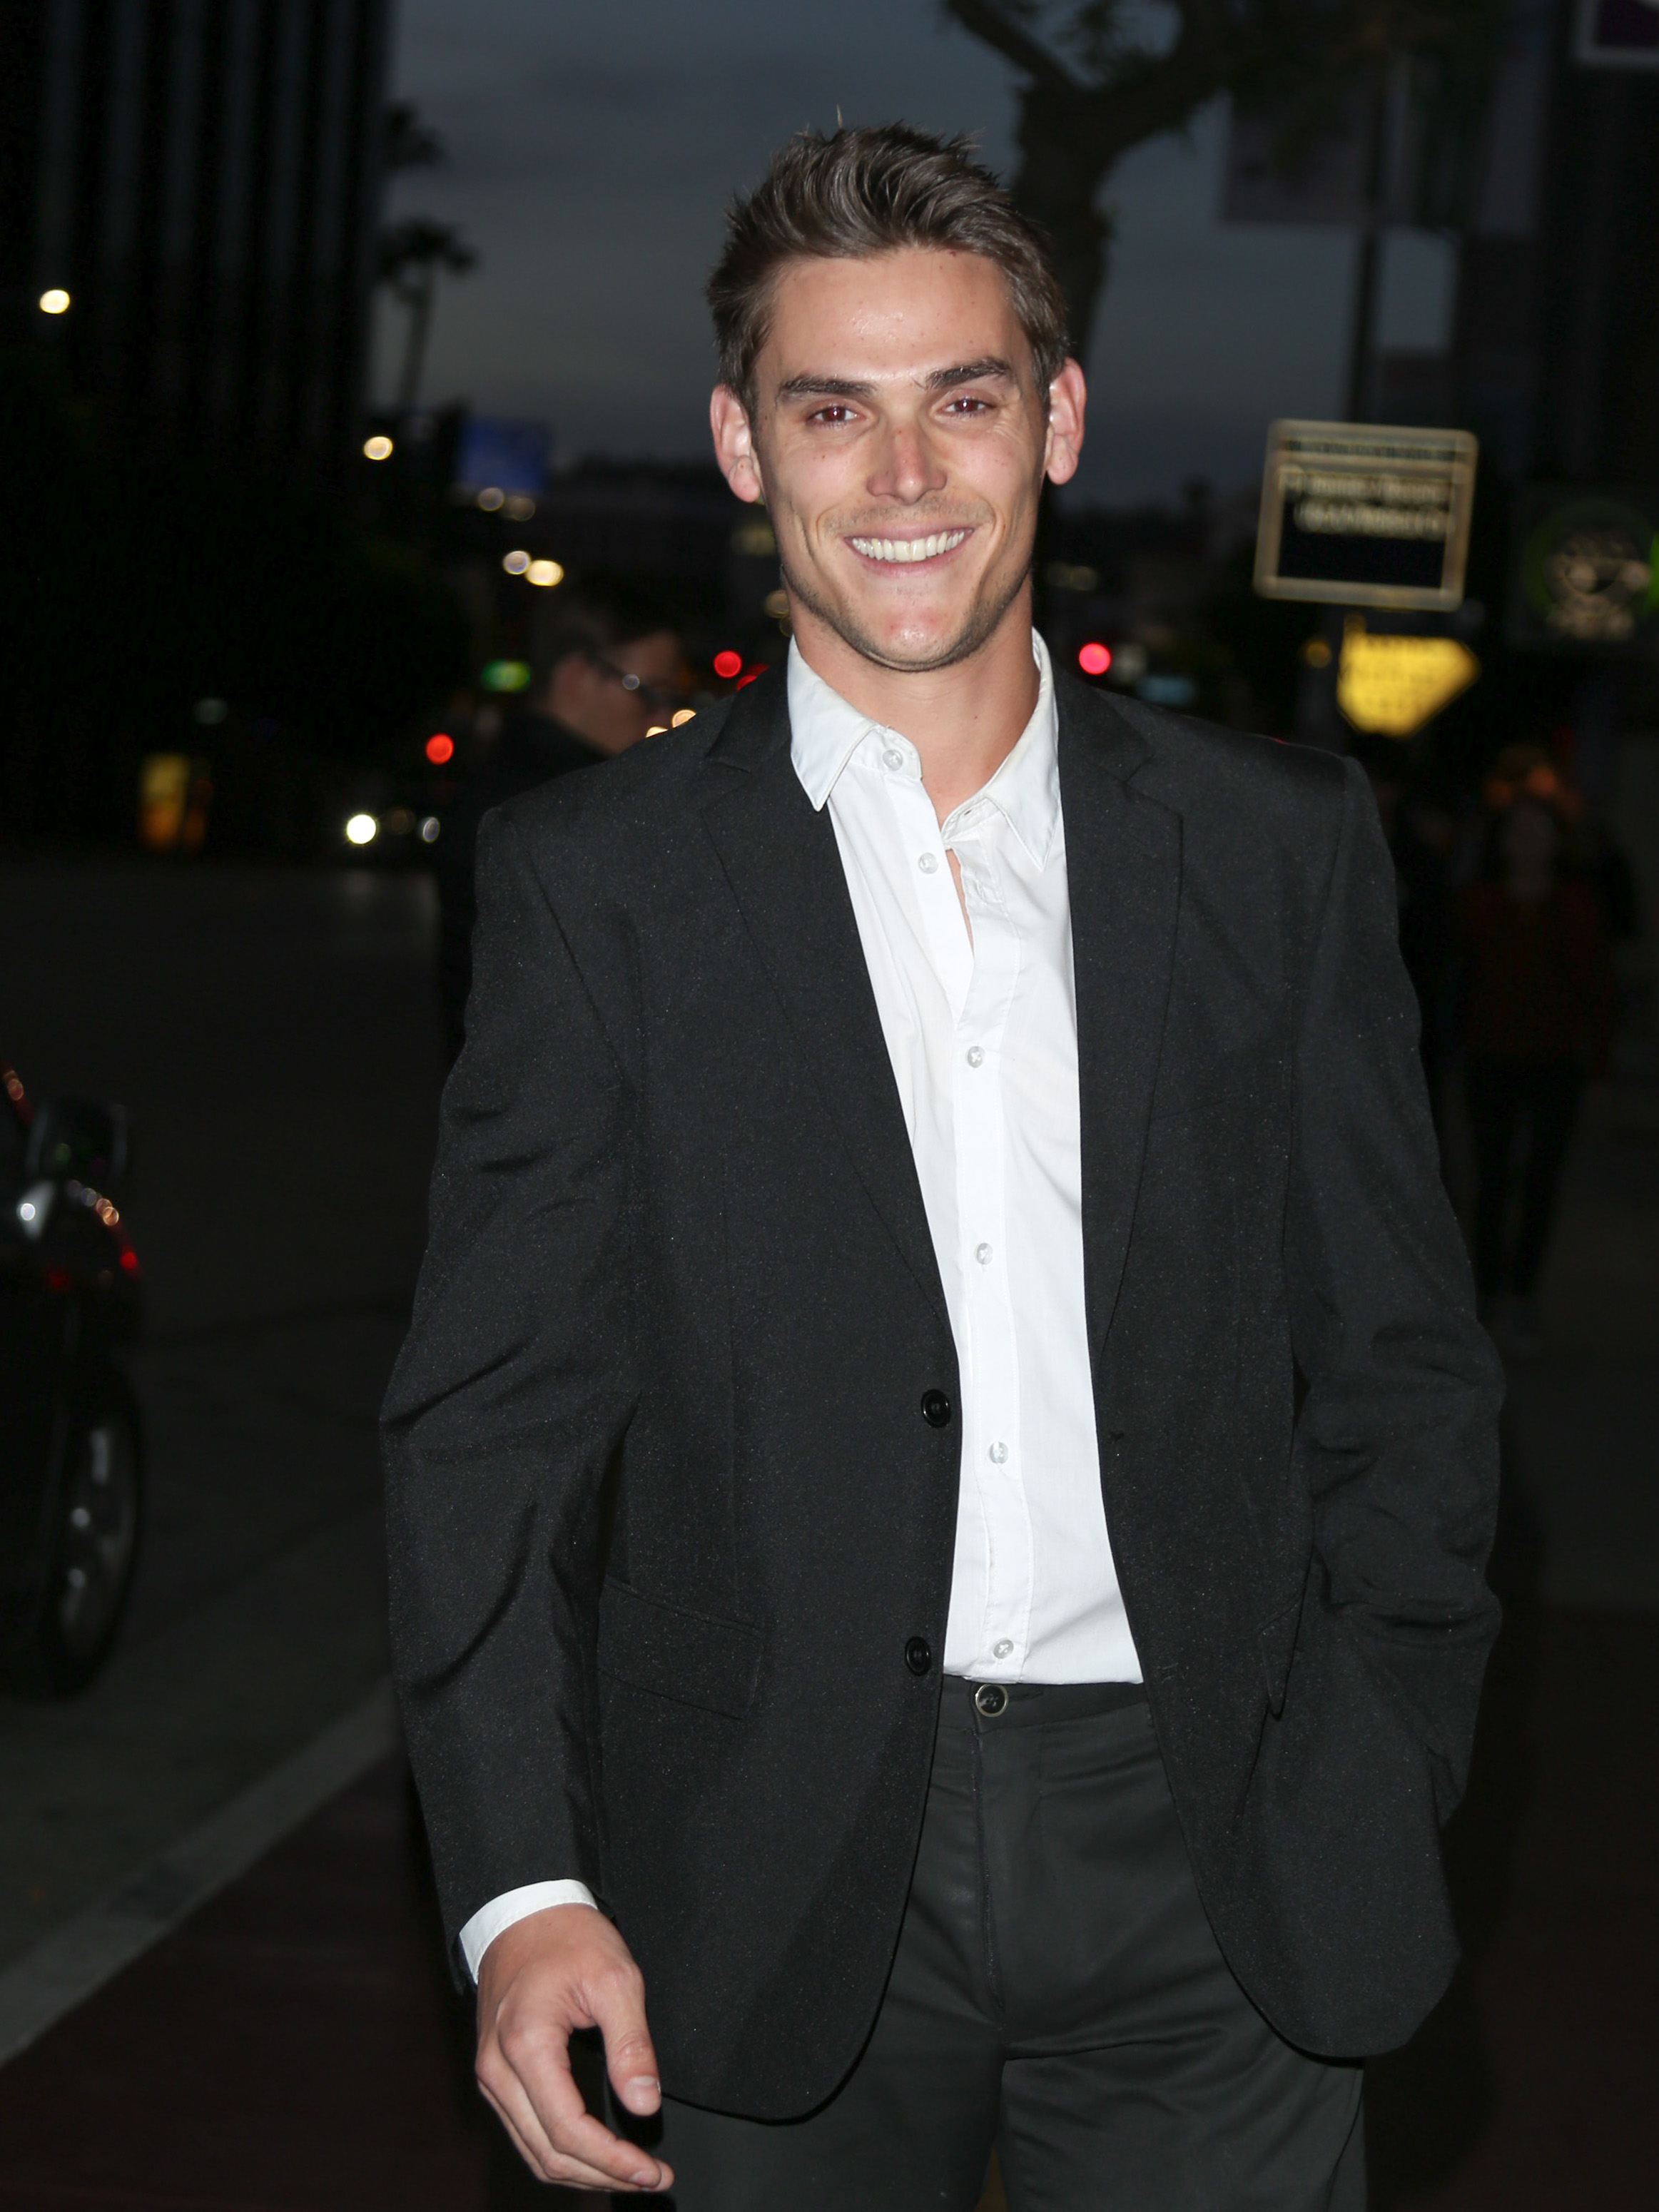 'The Young and the Restless' actor Mark Grossman wearing a black suit and white shirt.